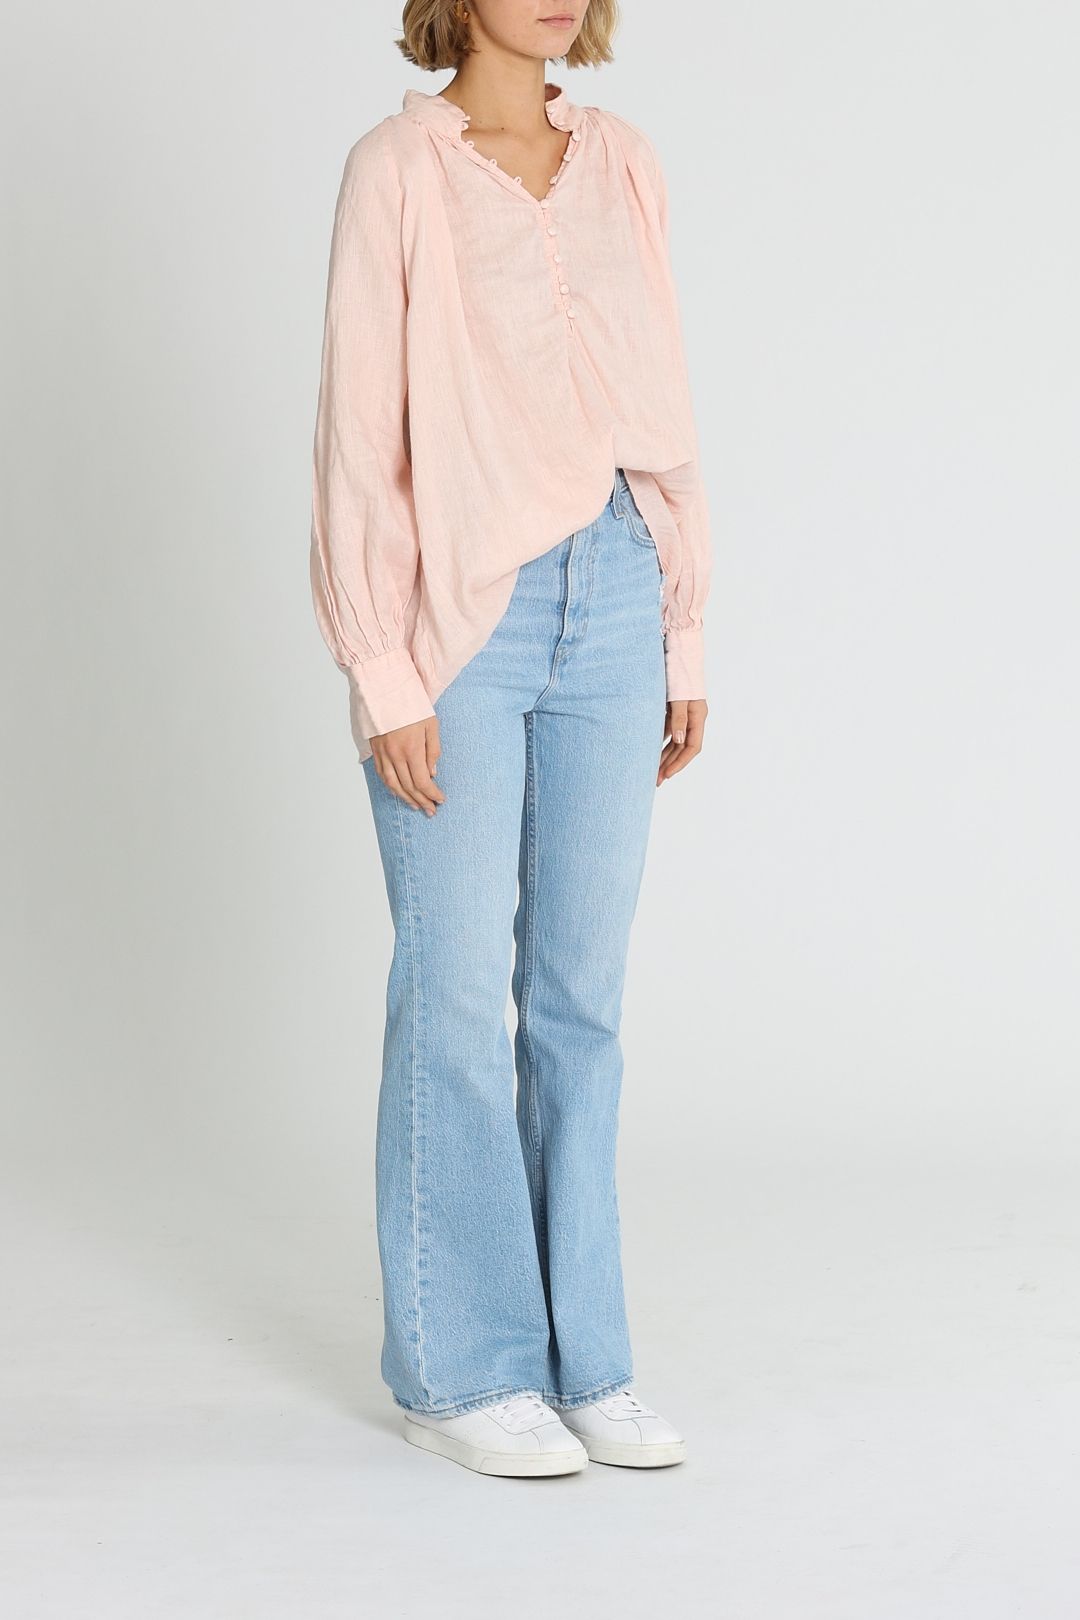 Bohemian Traders Wide Collar Button Up Top Soft Pink Linen Long Sleeves